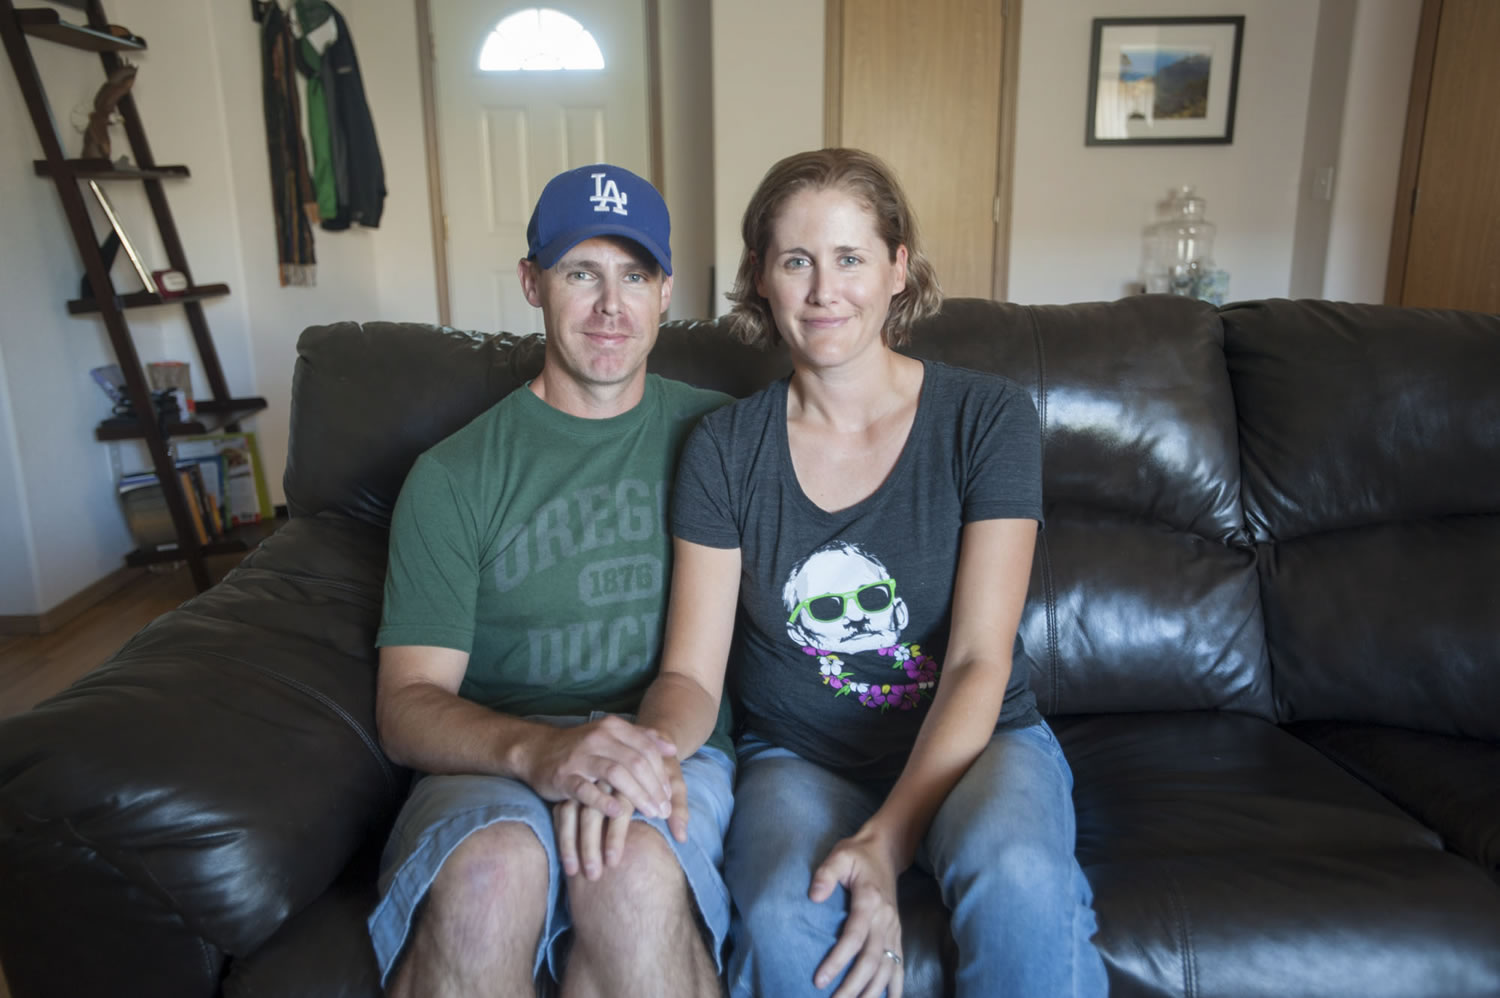 Alicia Clausen, 37, and her husband of 15 years, Pete, learned she  had breast cancer in June. The Vancouver couple had planned to start a family this year but had to put those plans on hold after learning she had cancer.